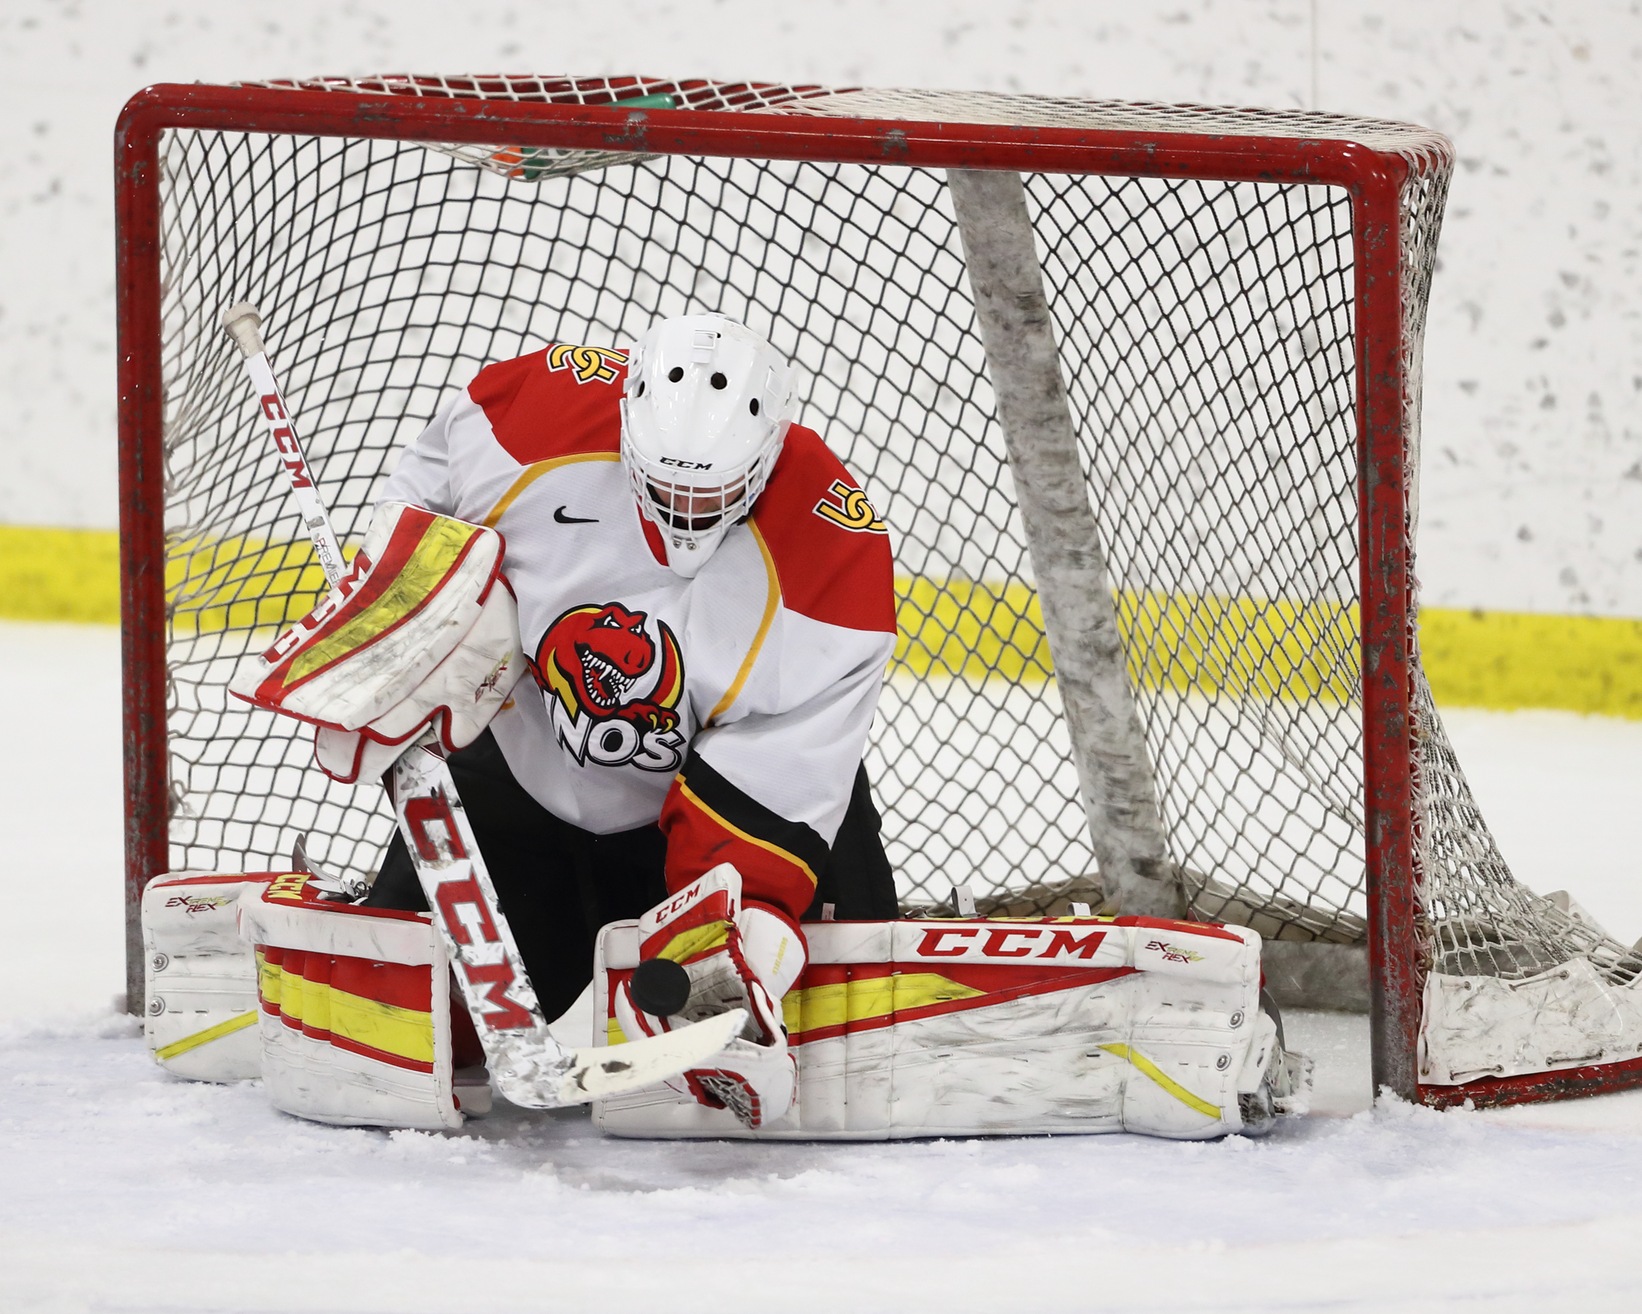 The Sunshine State is not necessarily a hotbed for hockey in North America, but it is where rookie goalie Matthew Greenfield of the Calgary Dinos calls home.